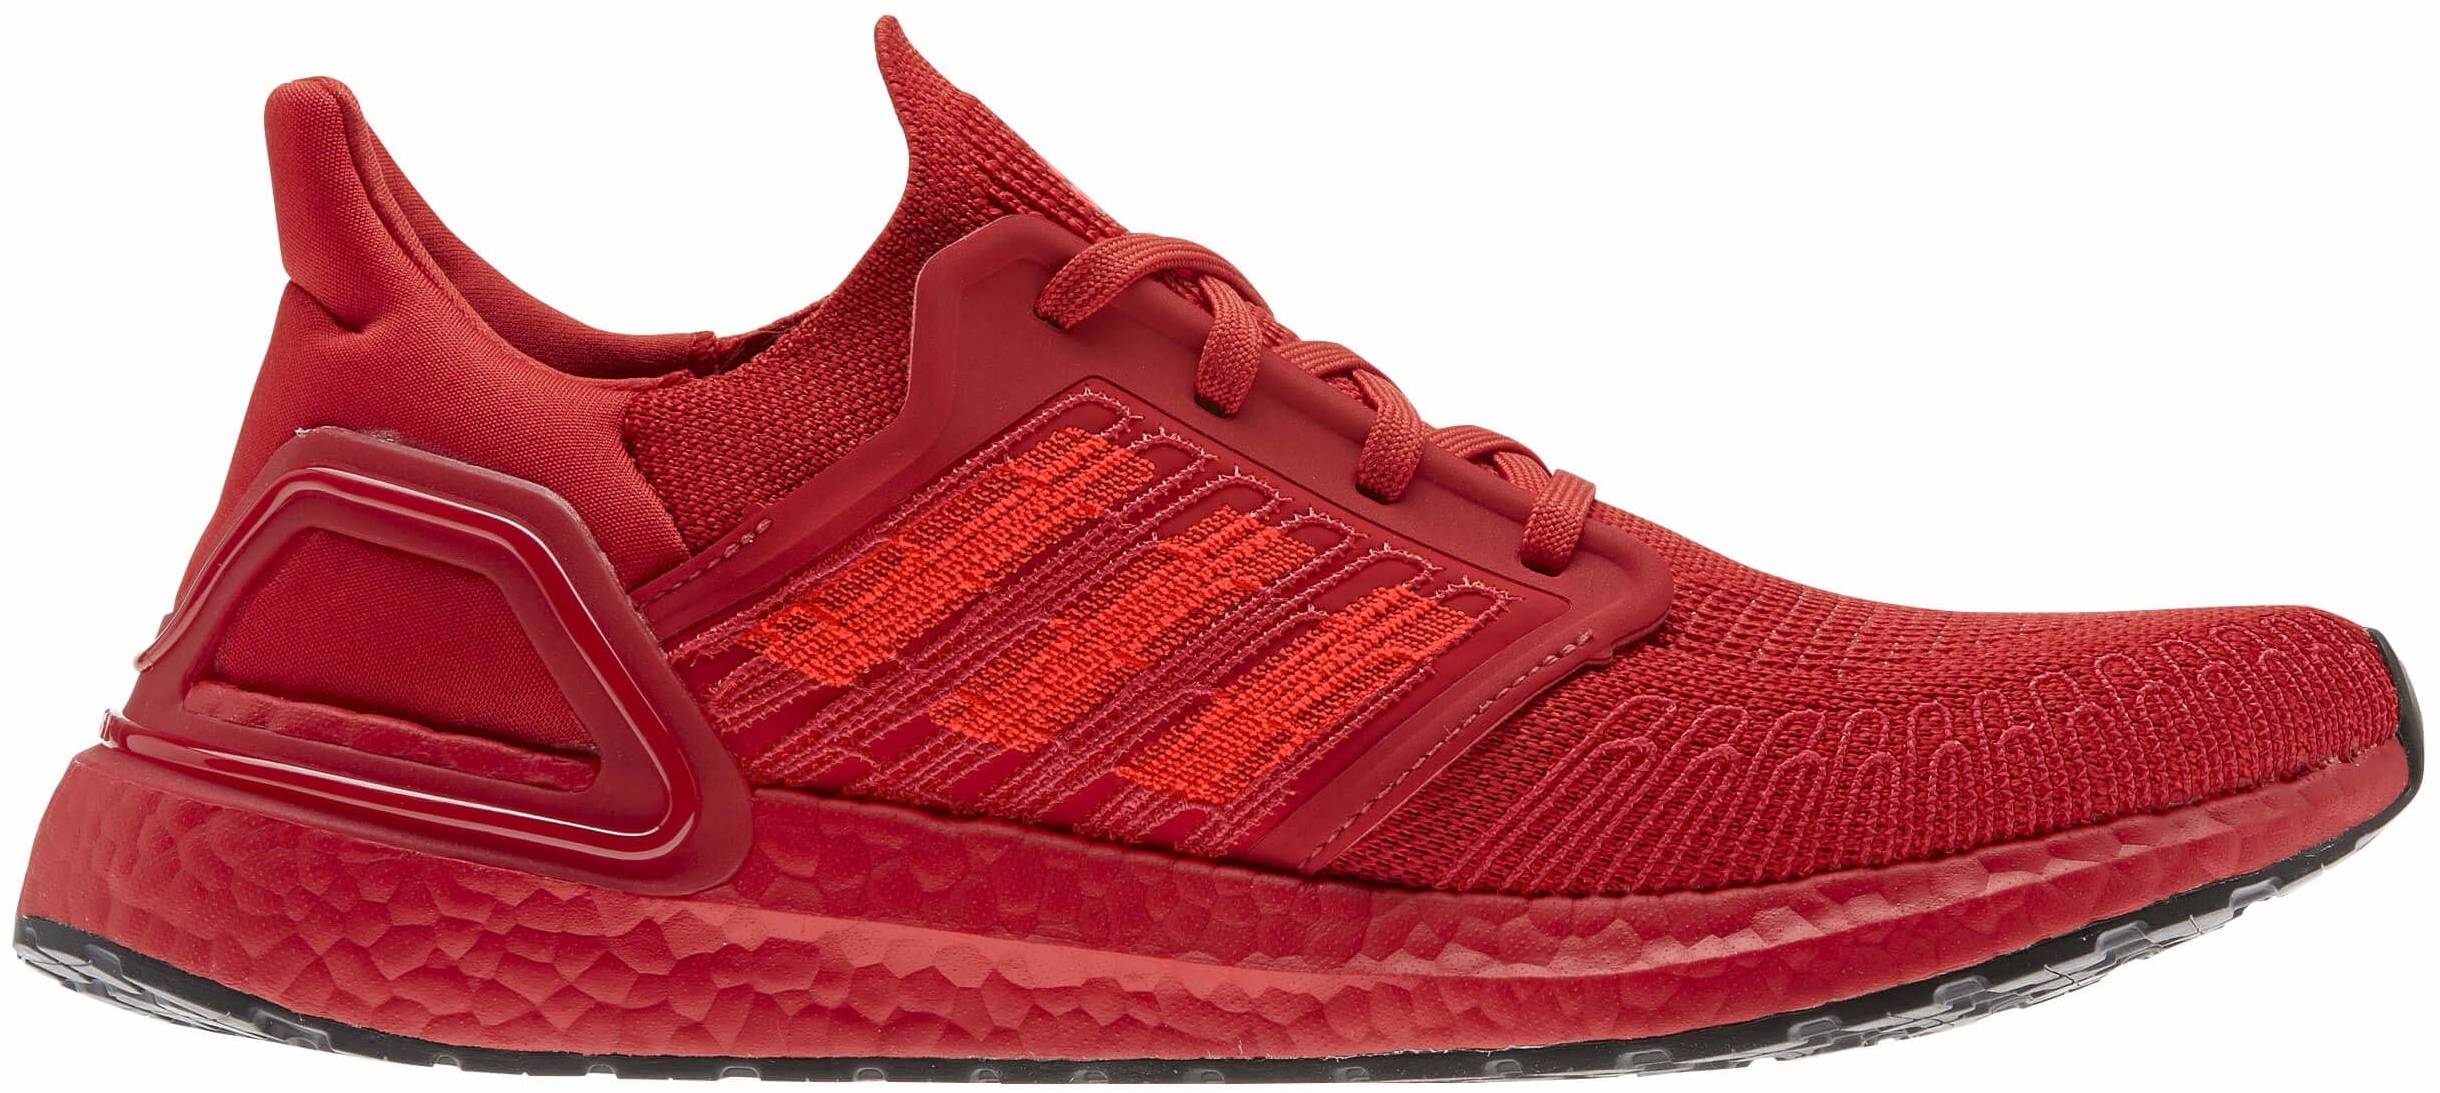 adidas red running shoes